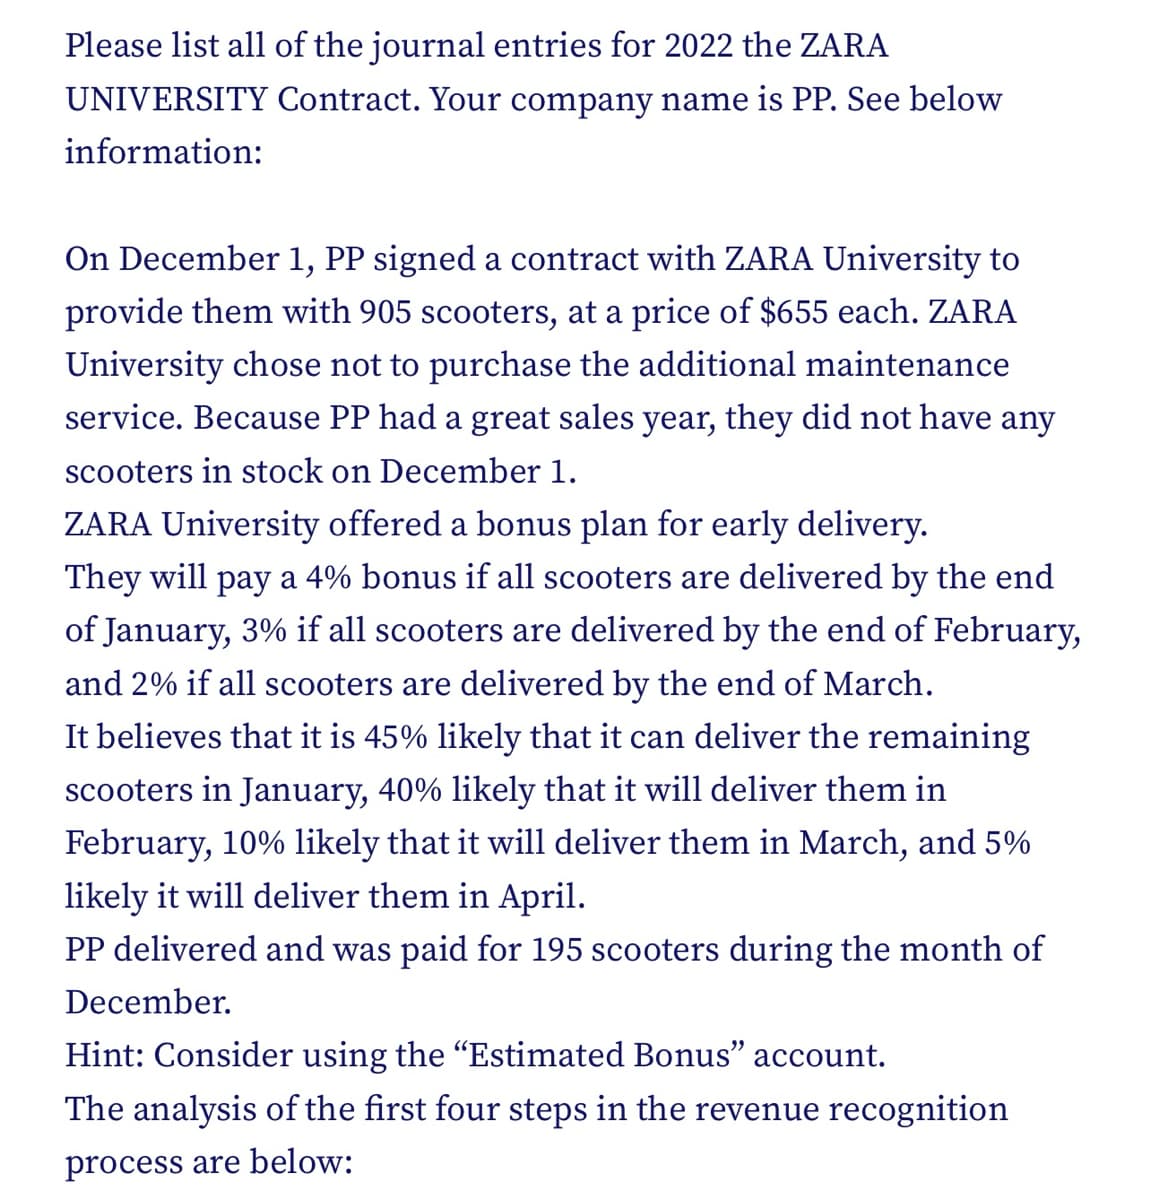 Please list all of the journal entries for 2022 the ZARA
UNIVERSITY Contract. Your company name is PP. See below
information:
On December 1, PP signed a contract with ZARA University to
provide them with 905 scooters, at a price of $655 each. ZARA
University chose not to purchase the additional maintenance
service. Because PP had a great sales year, they did not have any
scooters in stock on December 1.
ZARA University offered a bonus plan for early delivery.
They will pay a 4% bonus if all scooters are delivered by the end
of January, 3% if all scooters are delivered by the end of February,
and 2% if all scooters are delivered by the end of March.
It believes that it is 45% likely that it can deliver the remaining
scooters in January, 40% likely that it will deliver them in
February, 10% likely that it will deliver them in March, and 5%
likely it will deliver them in April.
PP delivered and was paid for 195 scooters during the month of
December.
Hint: Consider using the “Estimated Bonus" account.
The analysis of the first four steps in the revenue recognition
process are below: